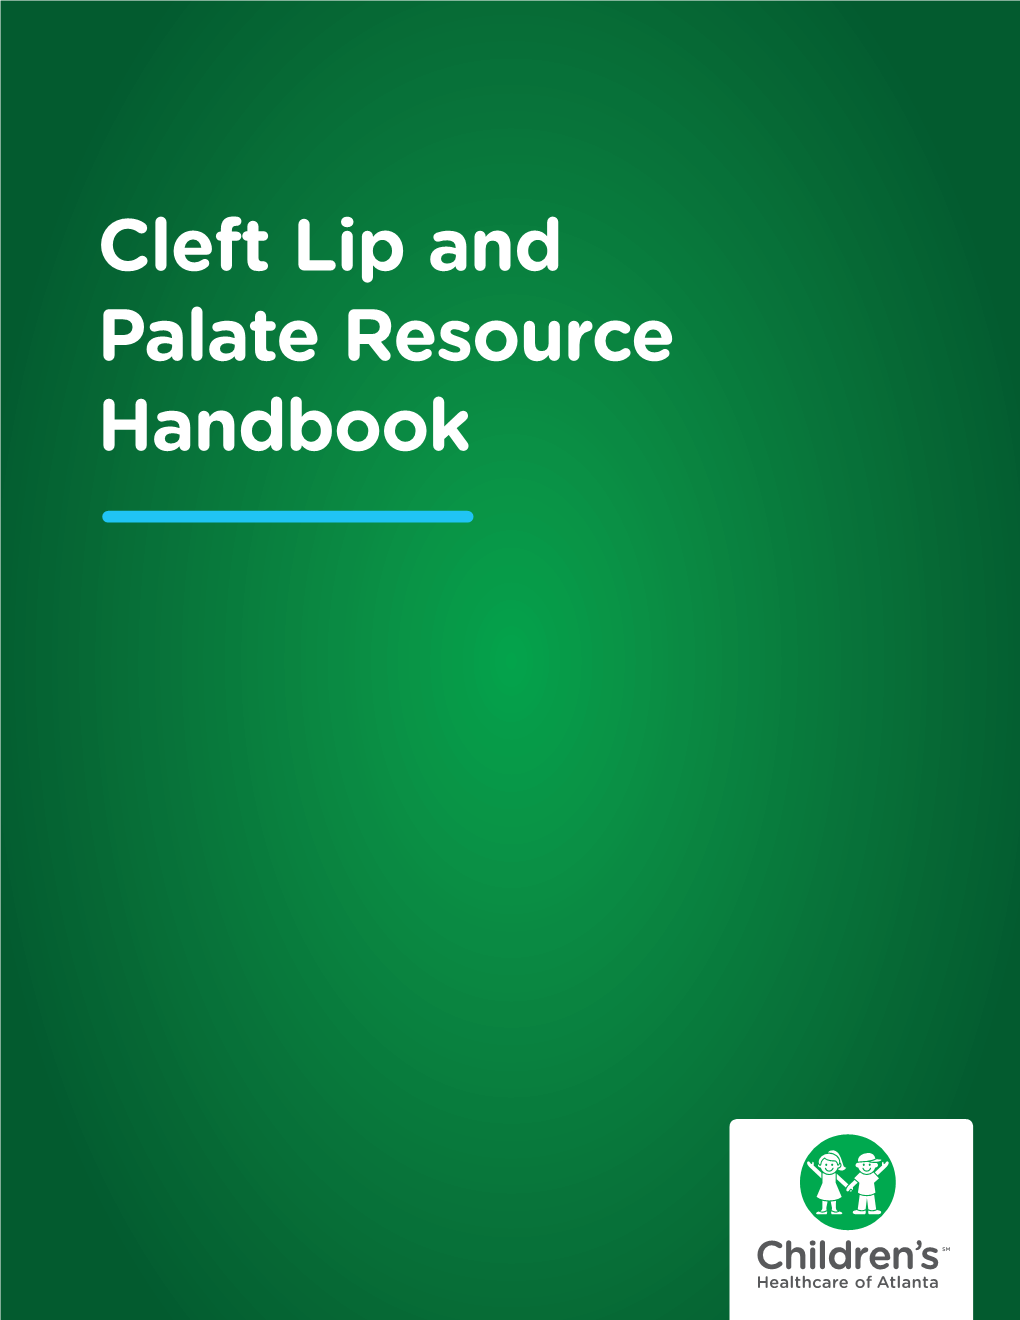 Cleft Lip and Palate Resource Handbook Table of Contents